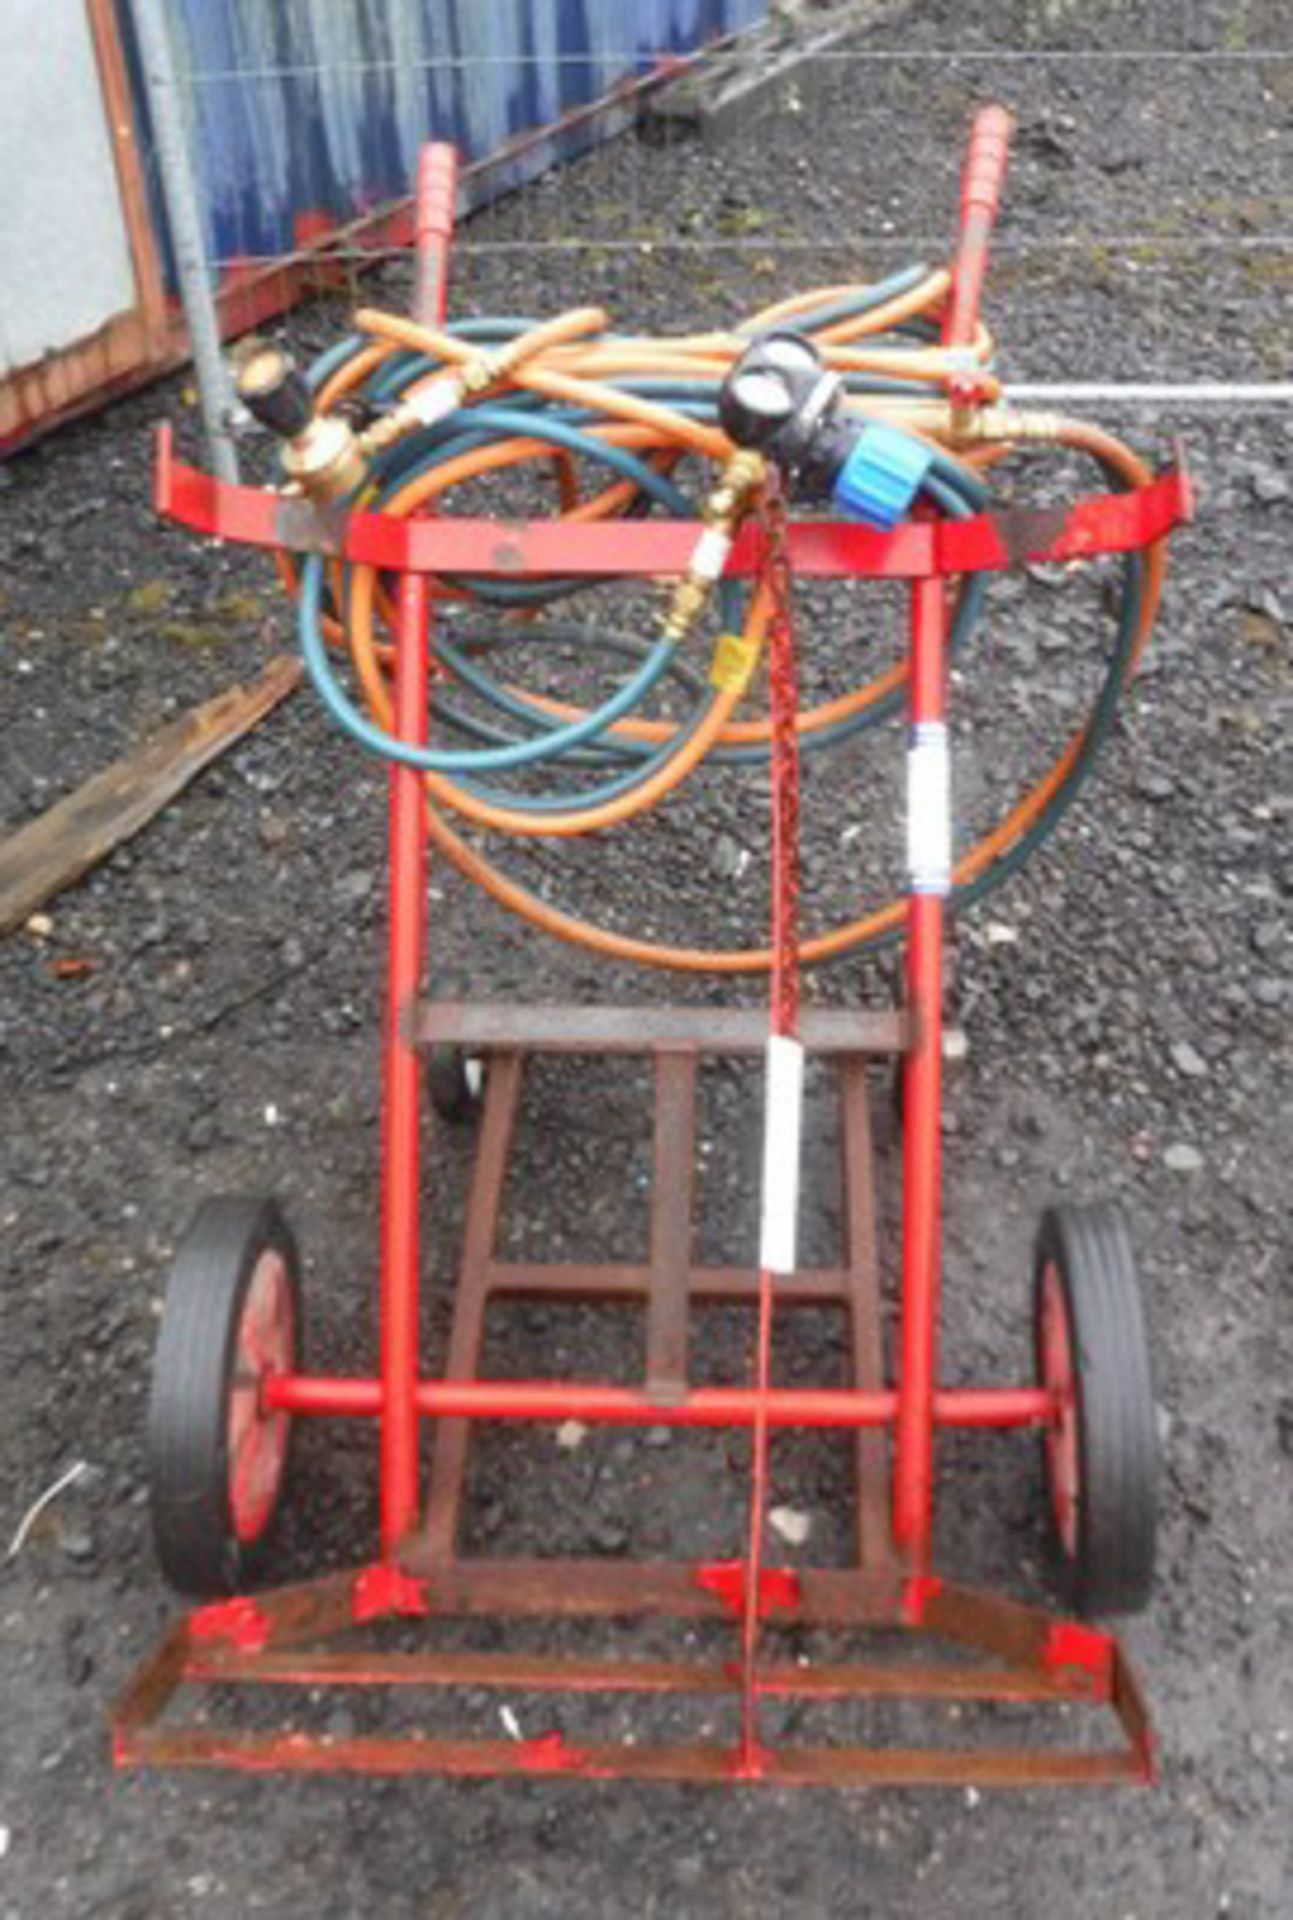 Gas cutting torch, hoses & gauges with cylinder trolley